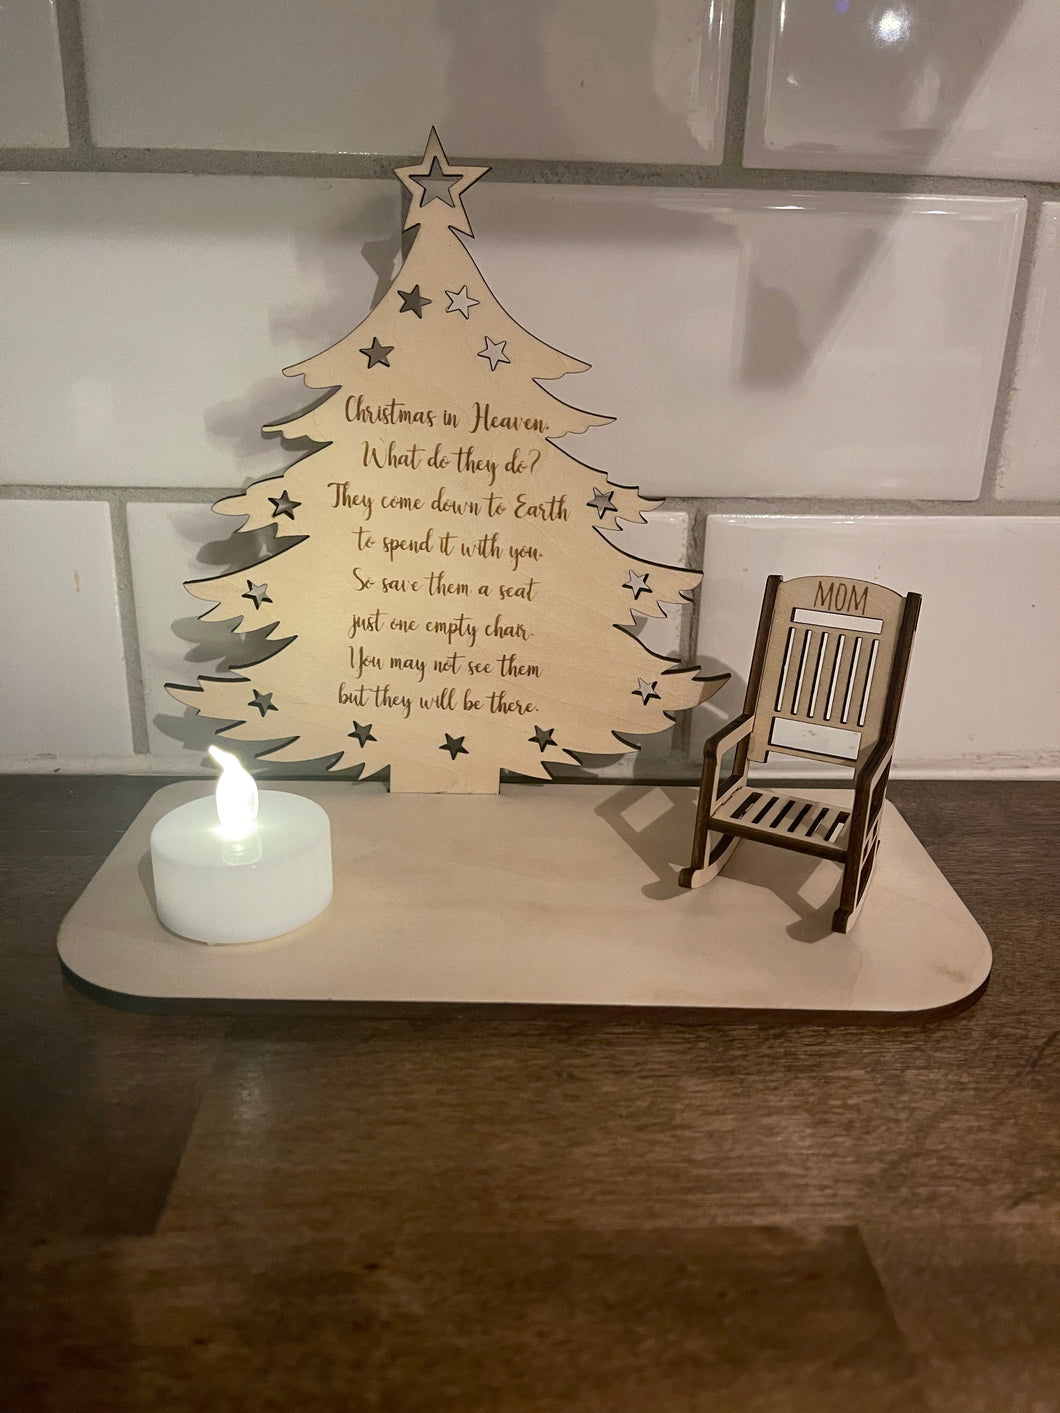 Christmas in heaven candle memorial